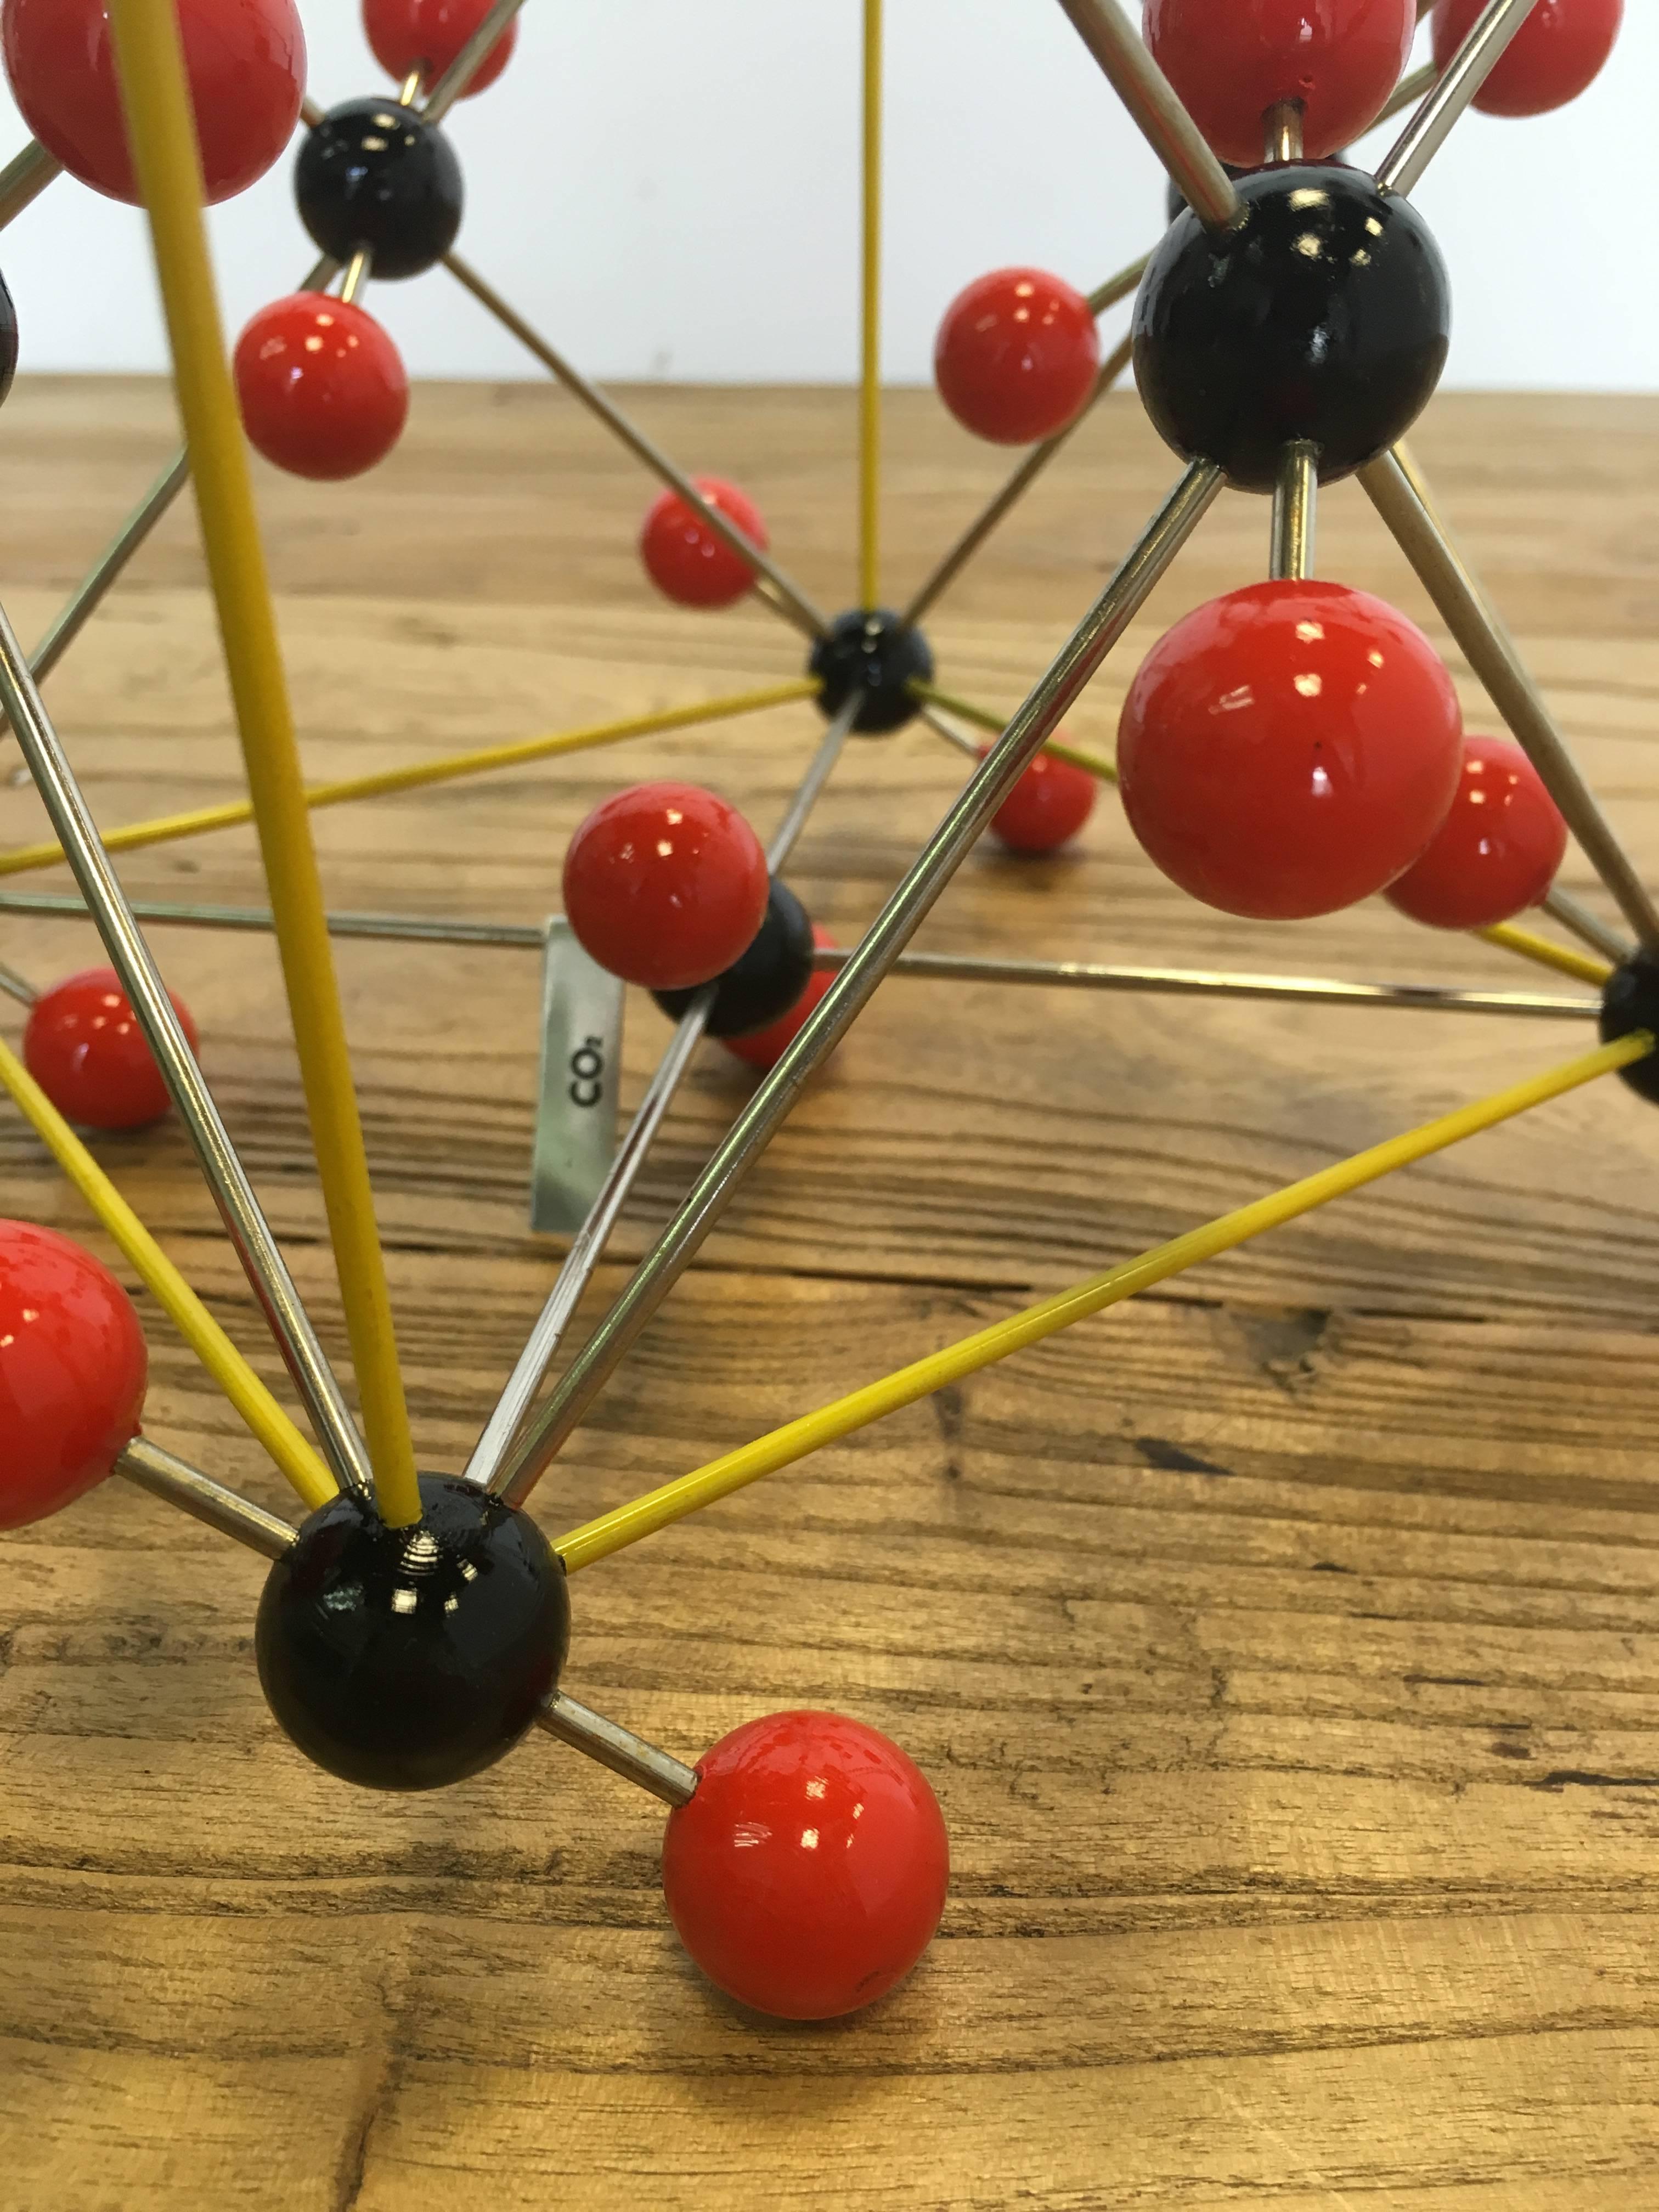 co2 ball and stick model